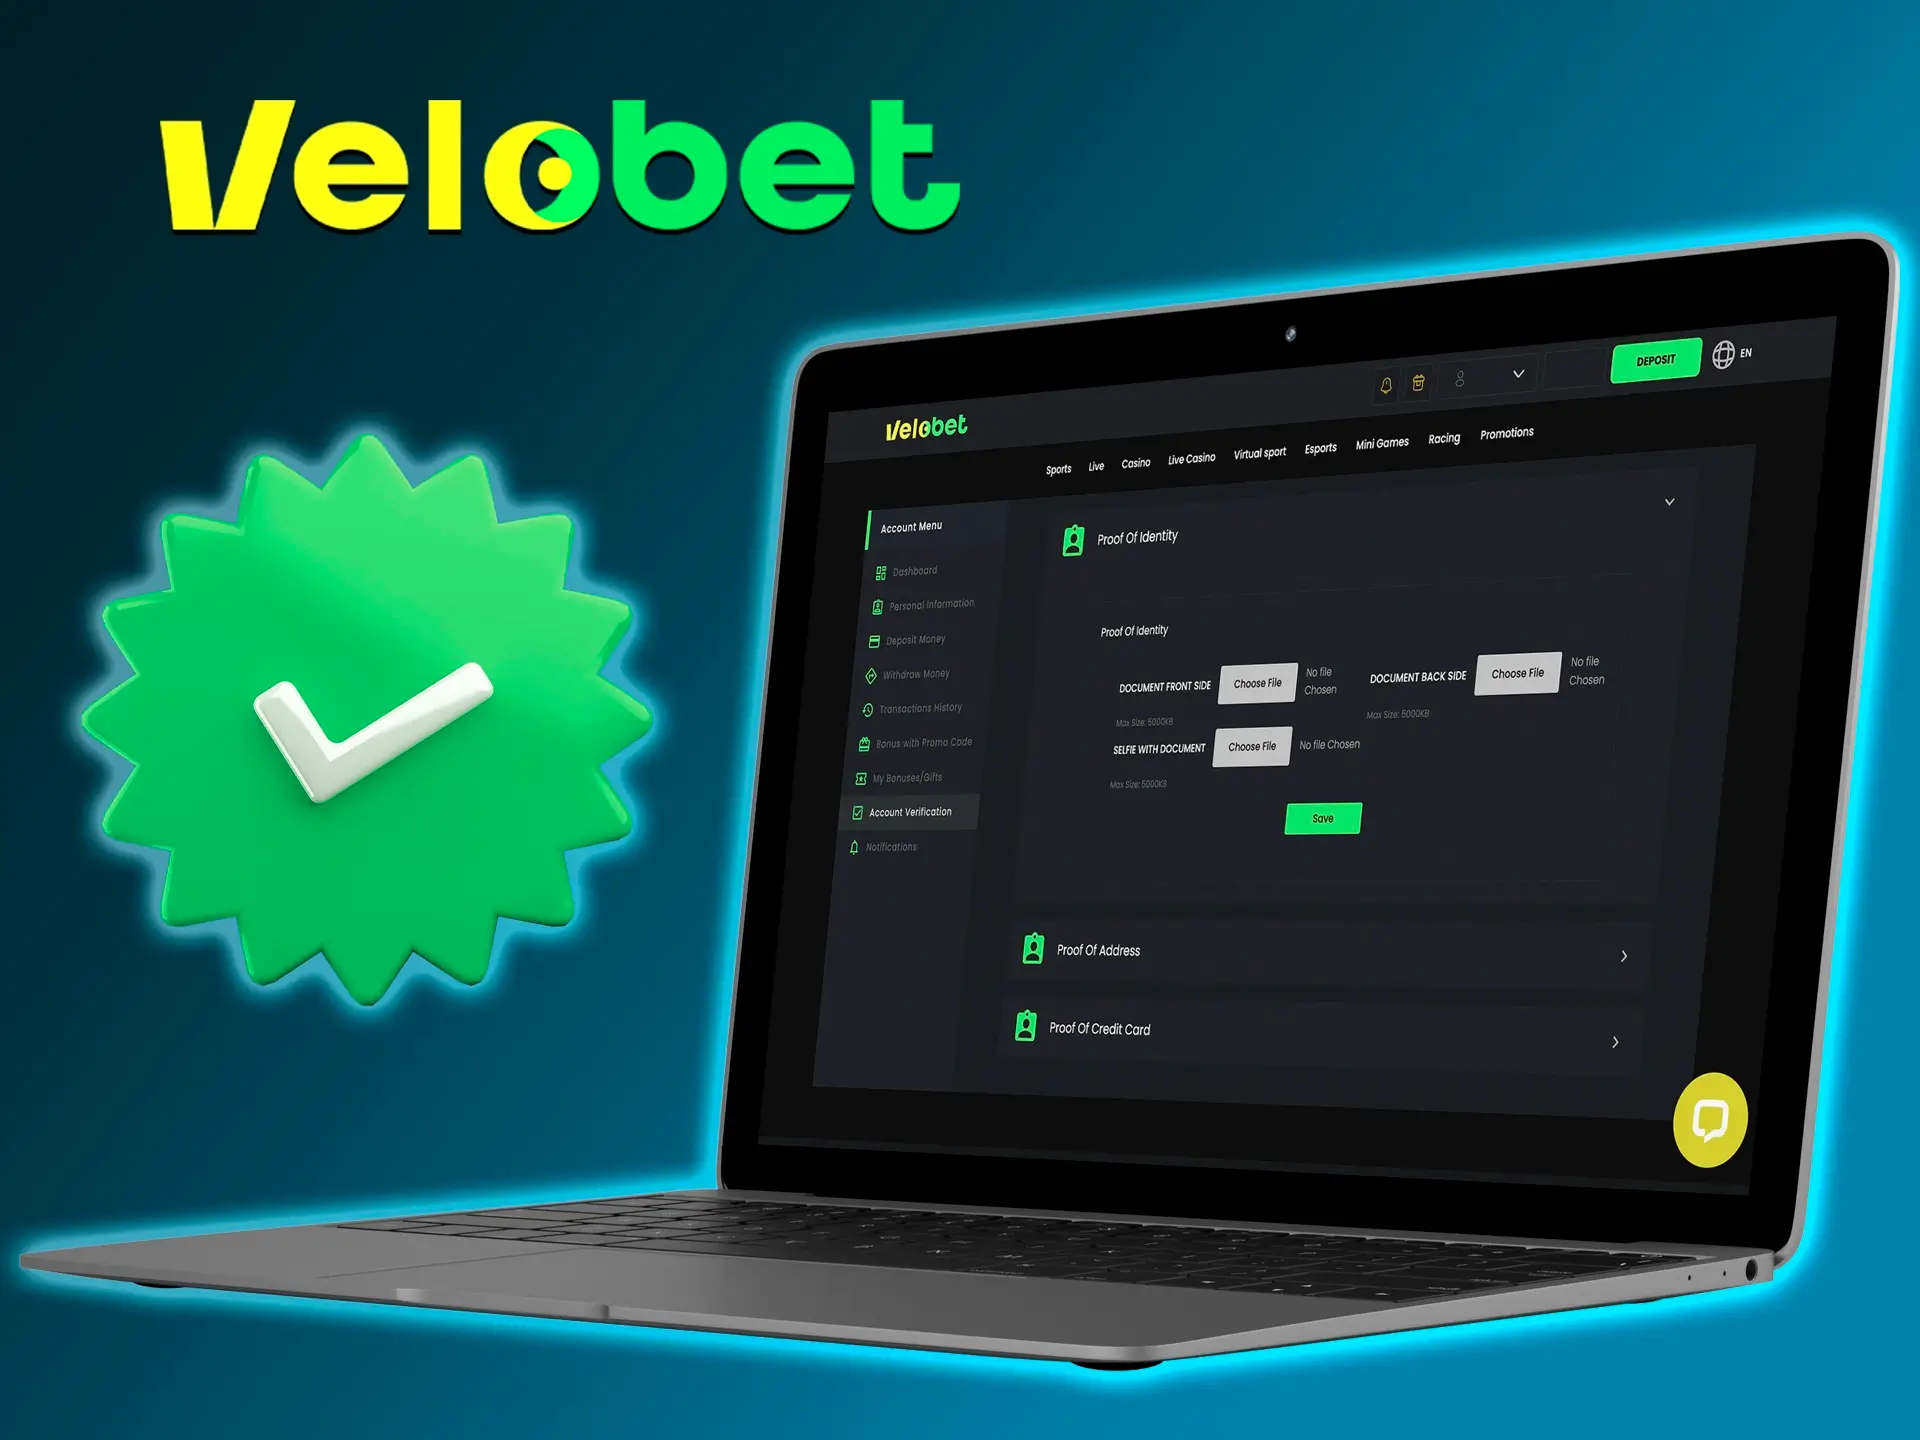 Be sure to confirm your account to get full access to the Velobet website features.